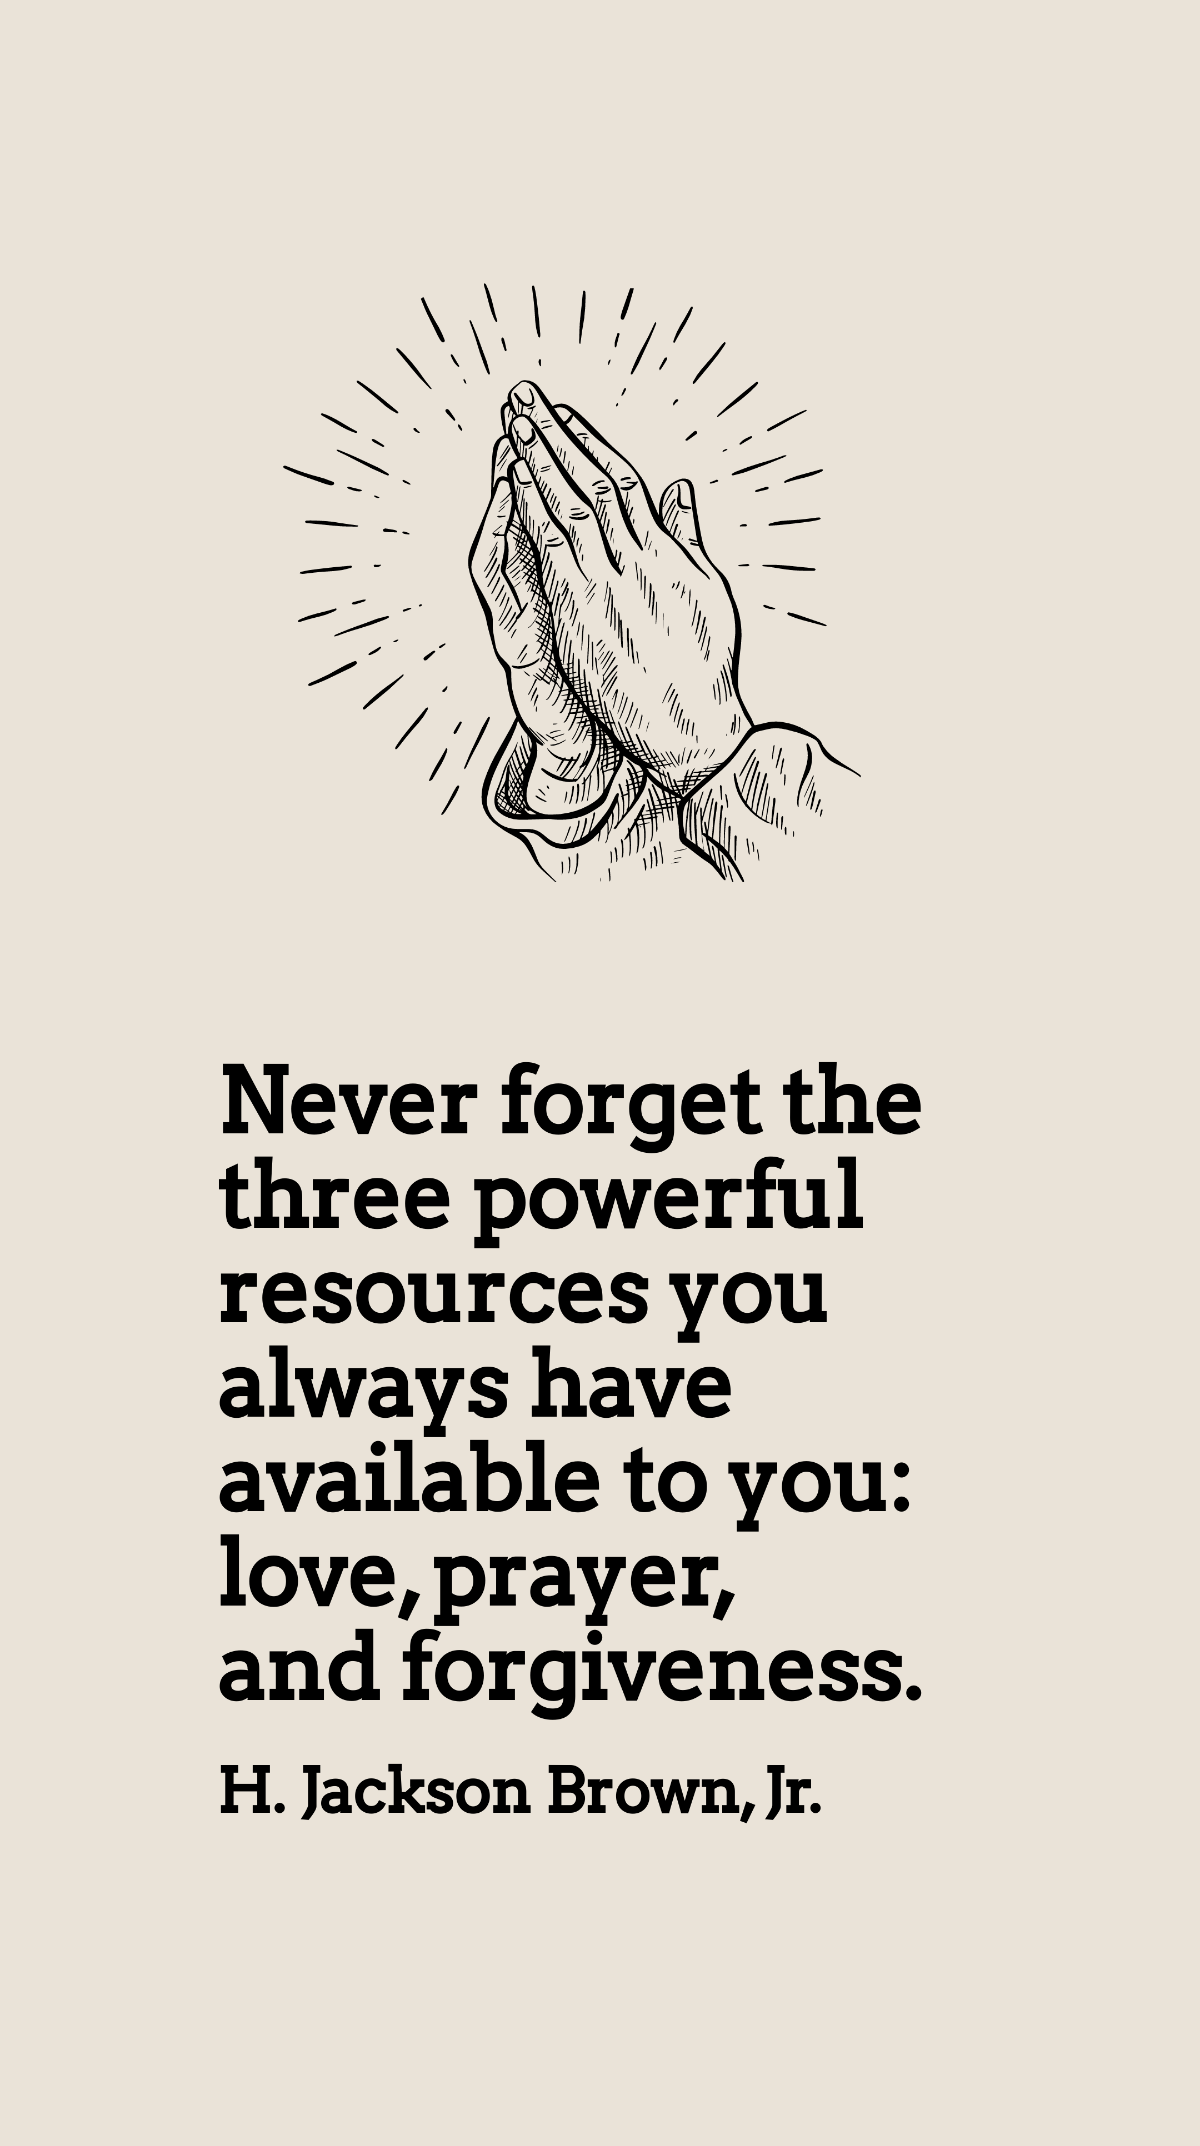 Free H. Jackson Brown, Jr. - Never forget the three powerful resources you always have available to you: love, prayer, and forgiveness. Template